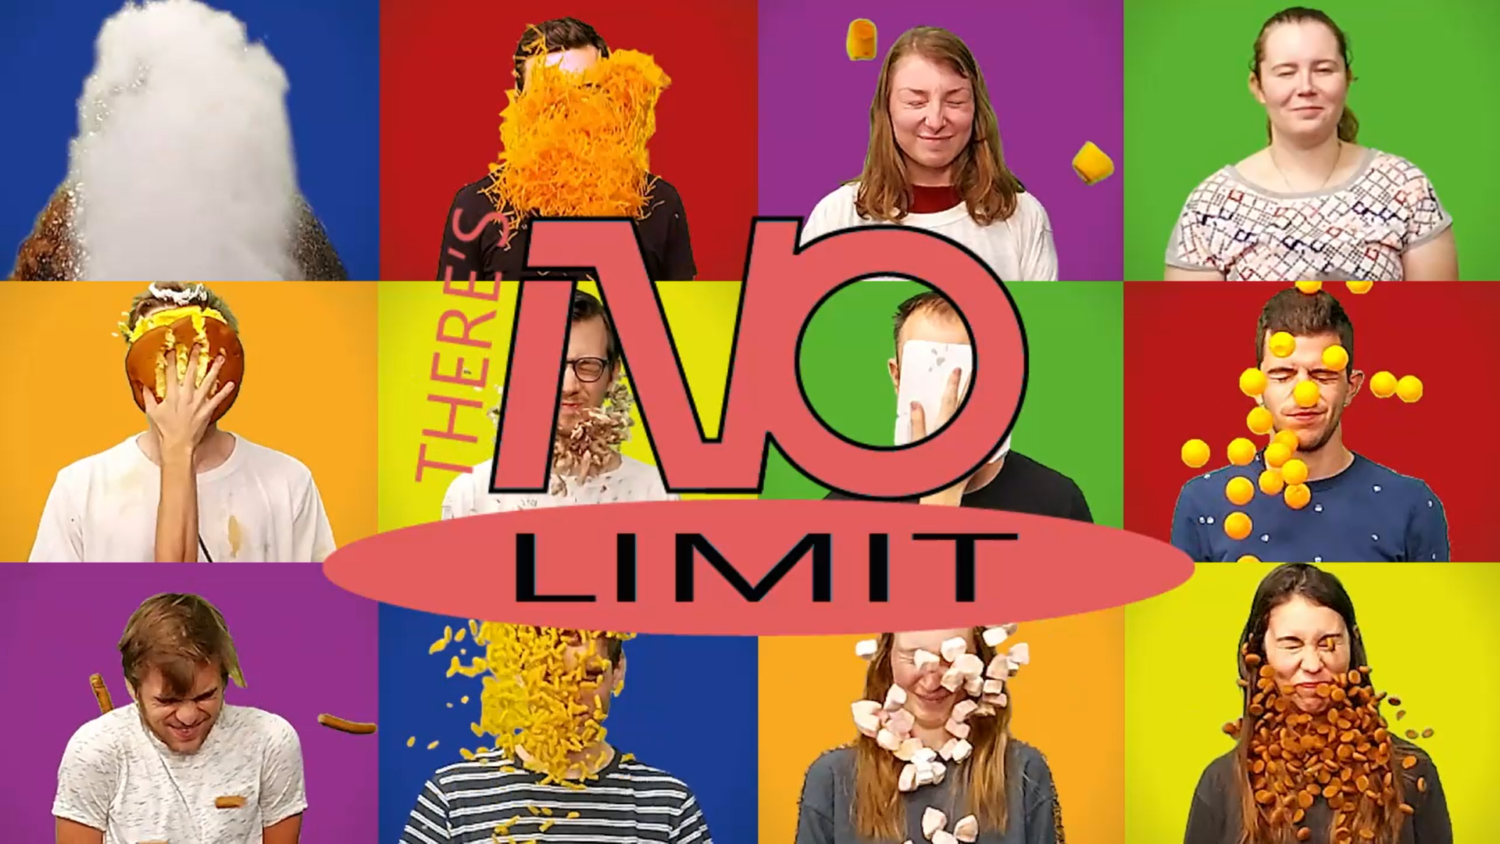 There’s No Limit: tweede liveshow 8 december